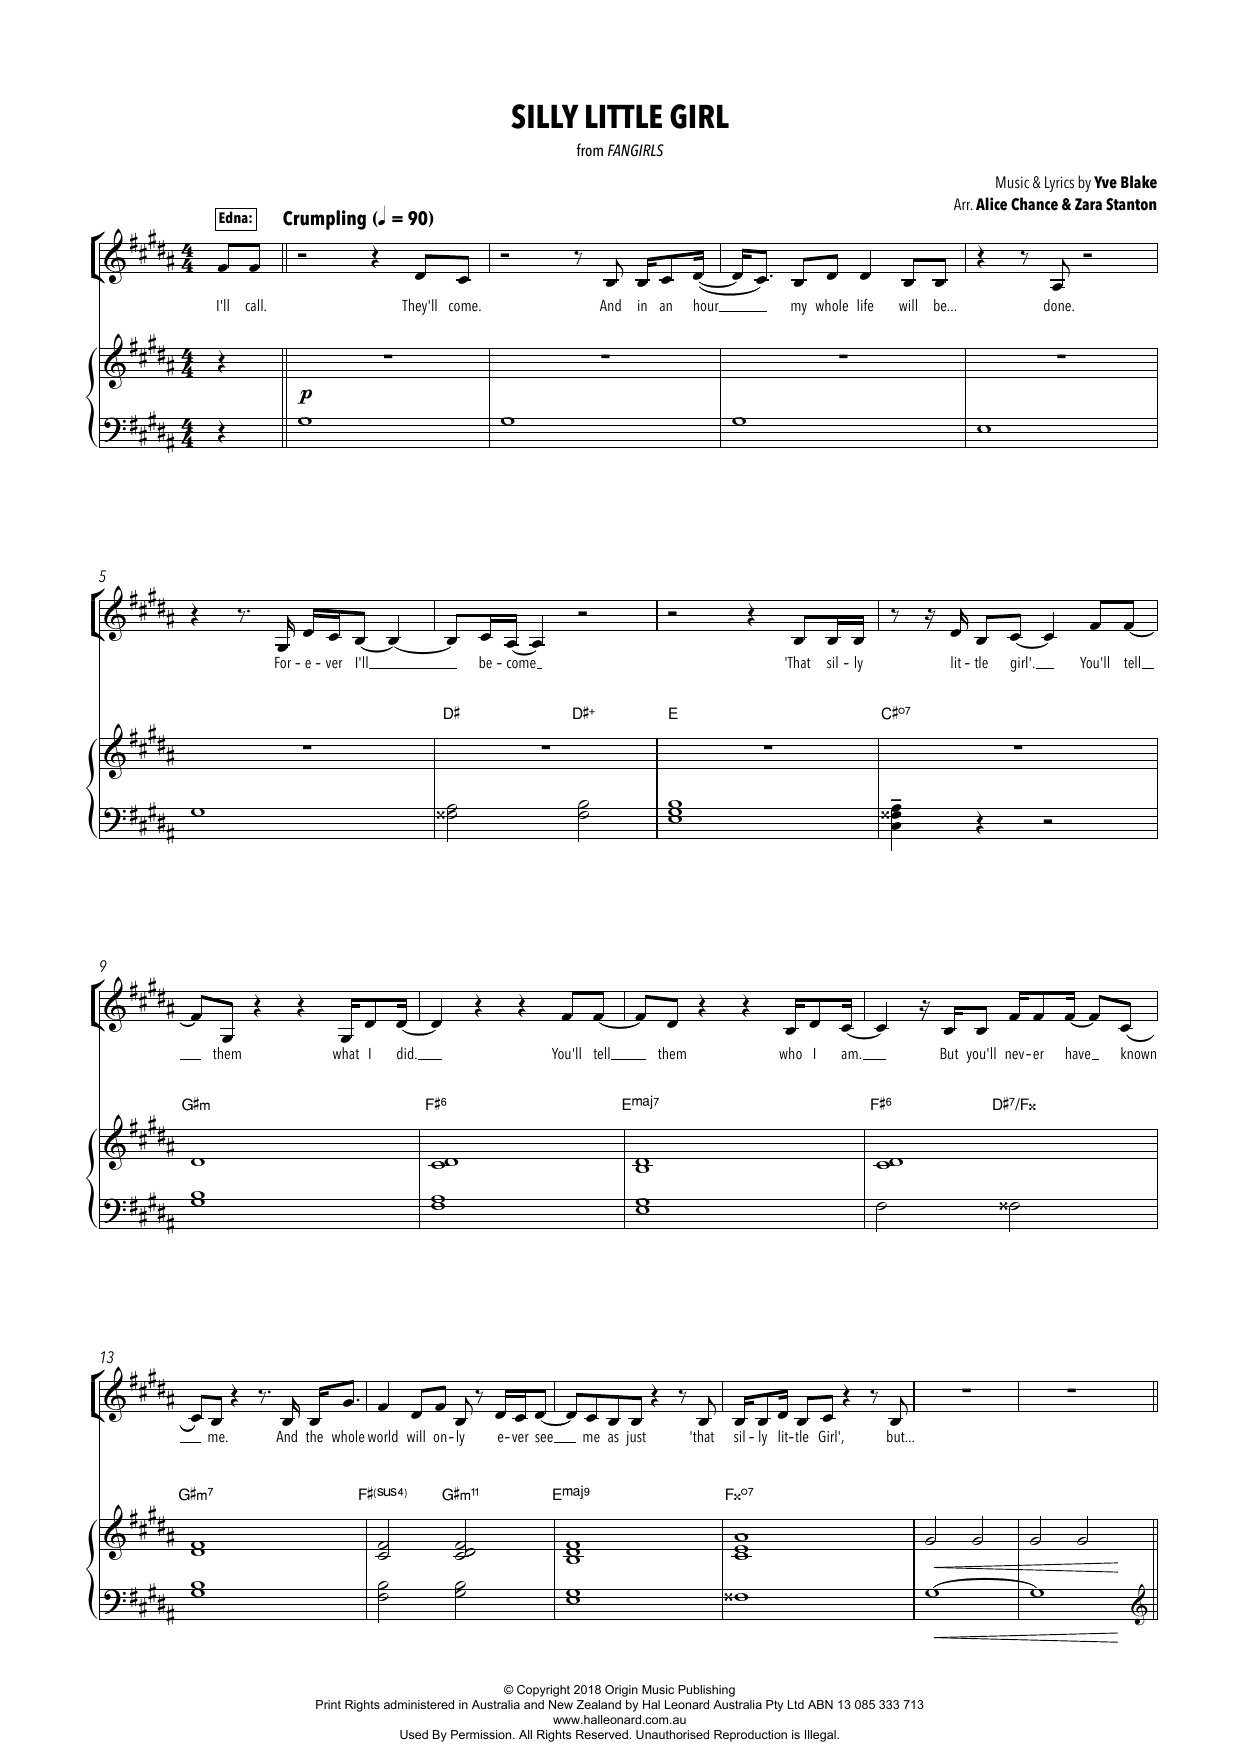 Download Yve Blake Silly Little Girl (from Fangirls) (arr. Sheet Music